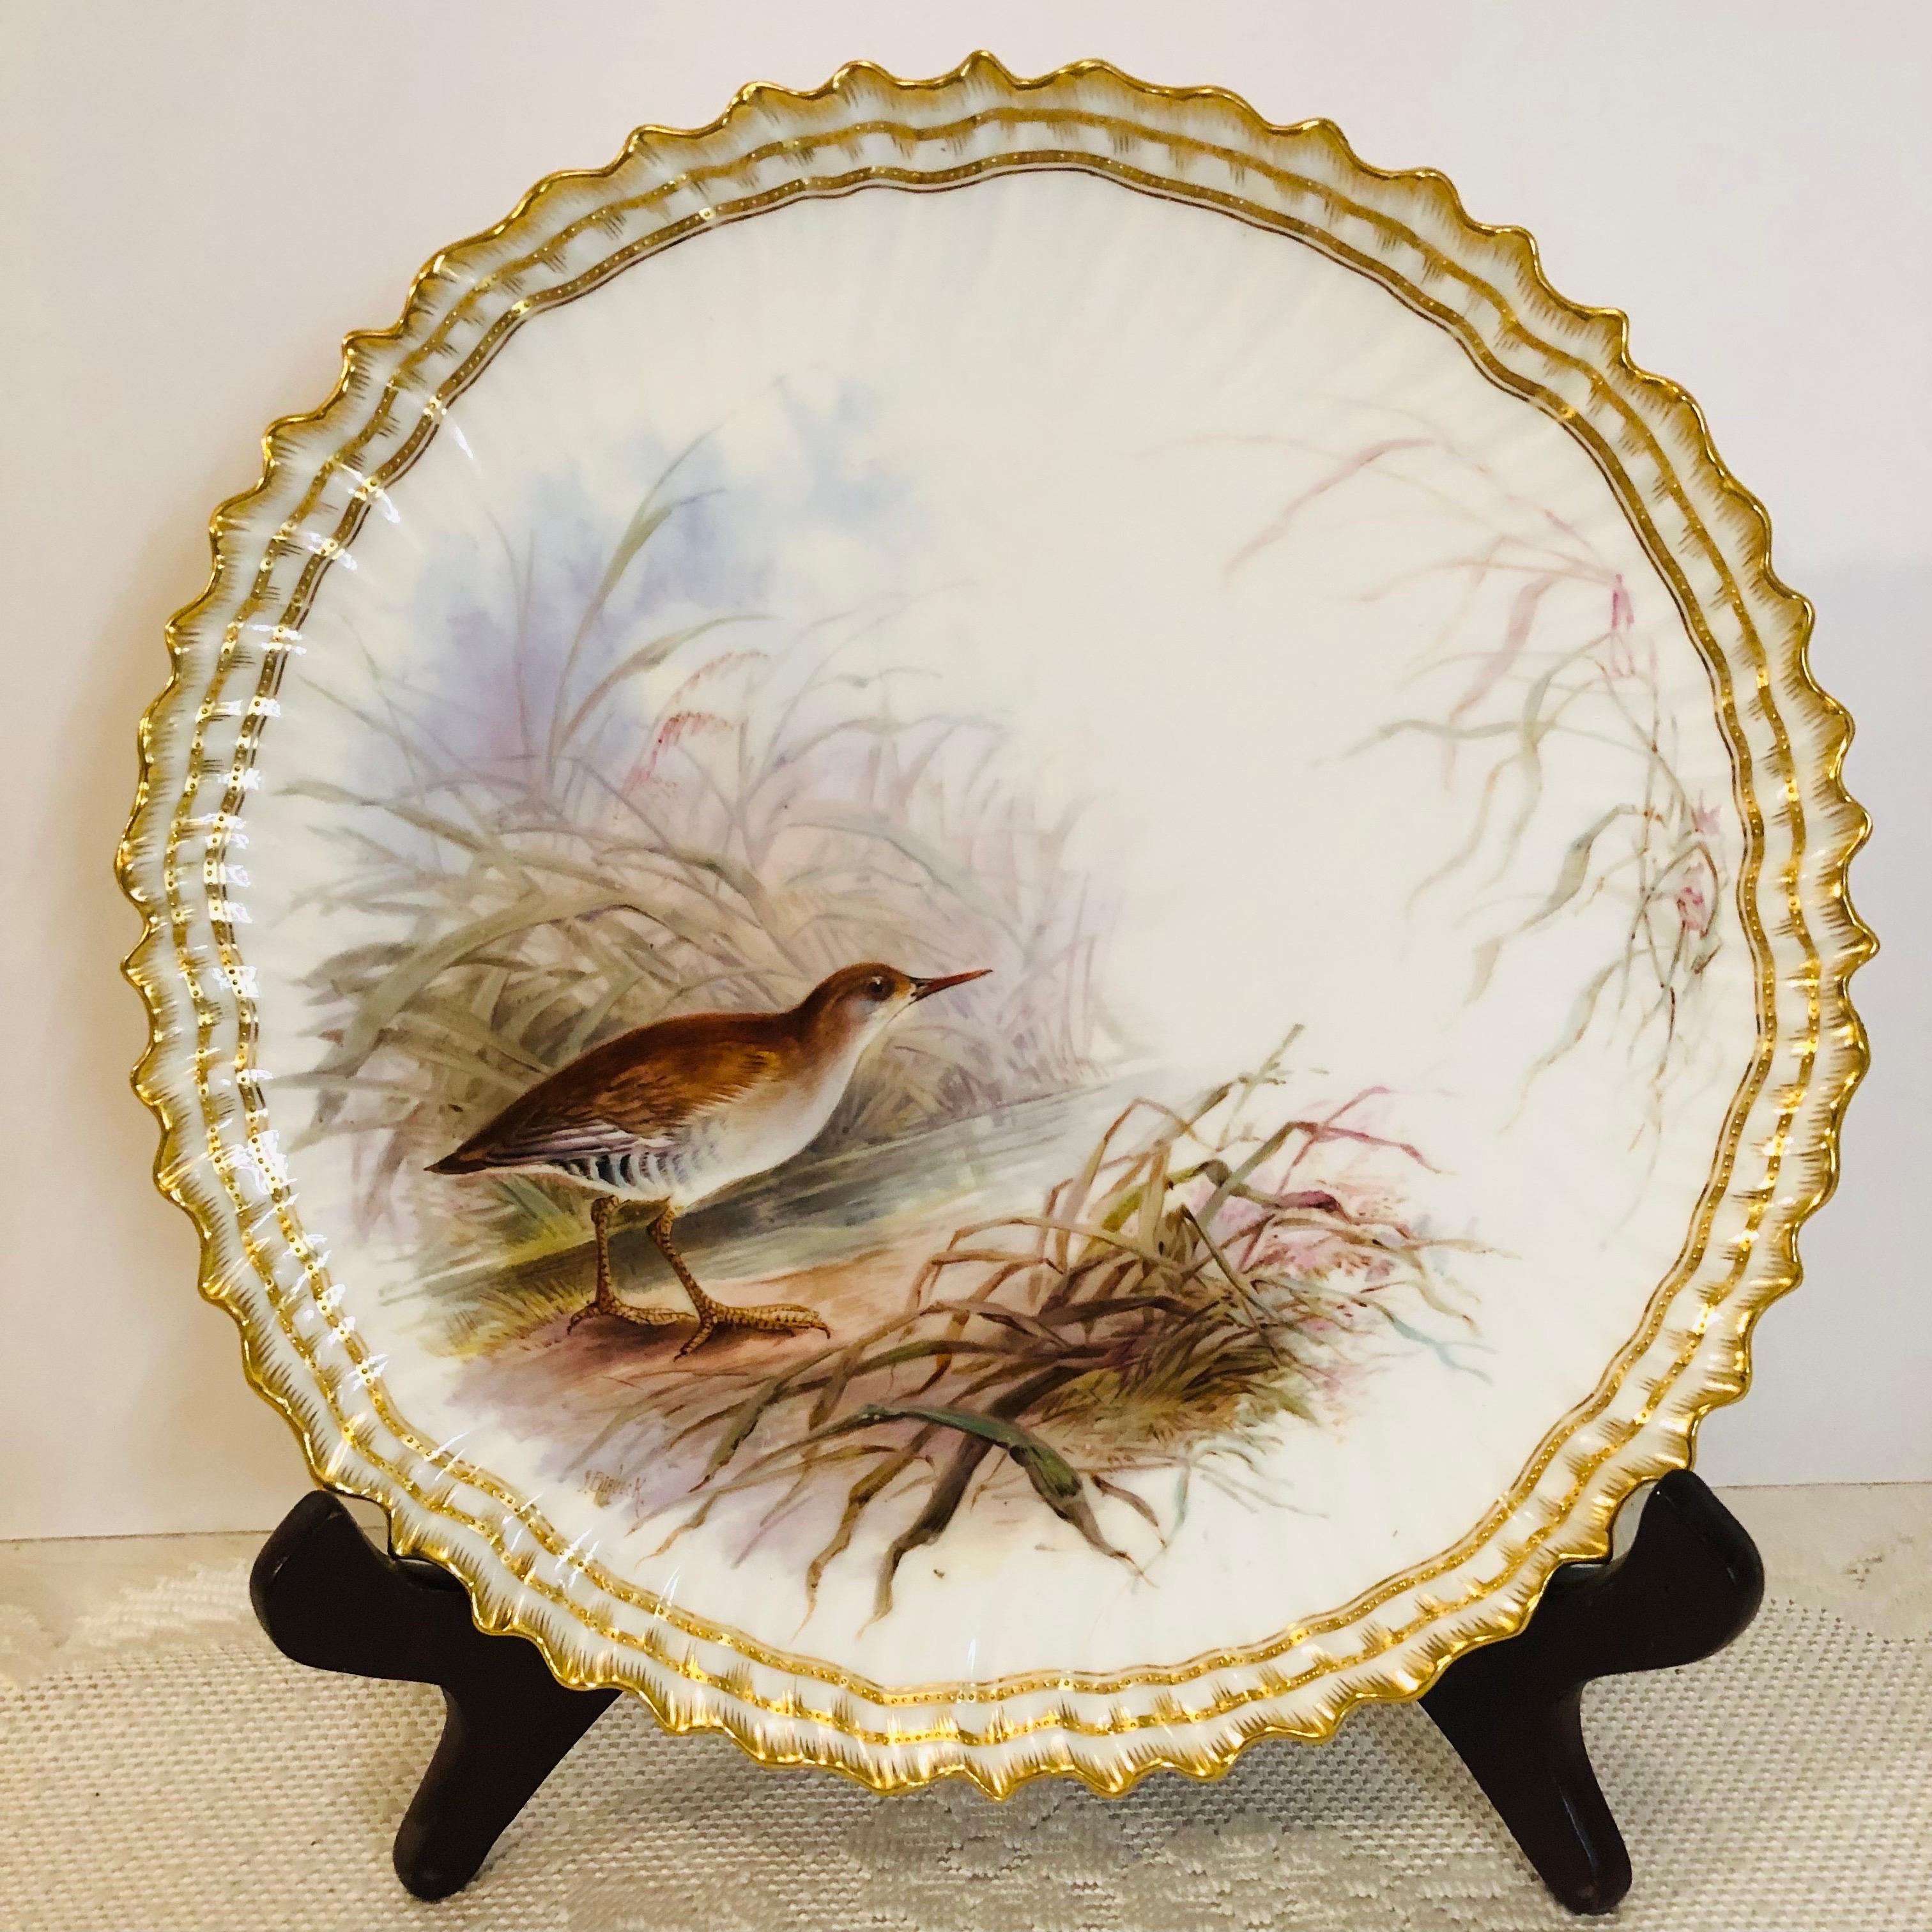 Set of 11 Cauldon Plates Each Painted Exquisitely With a Different Bird  5